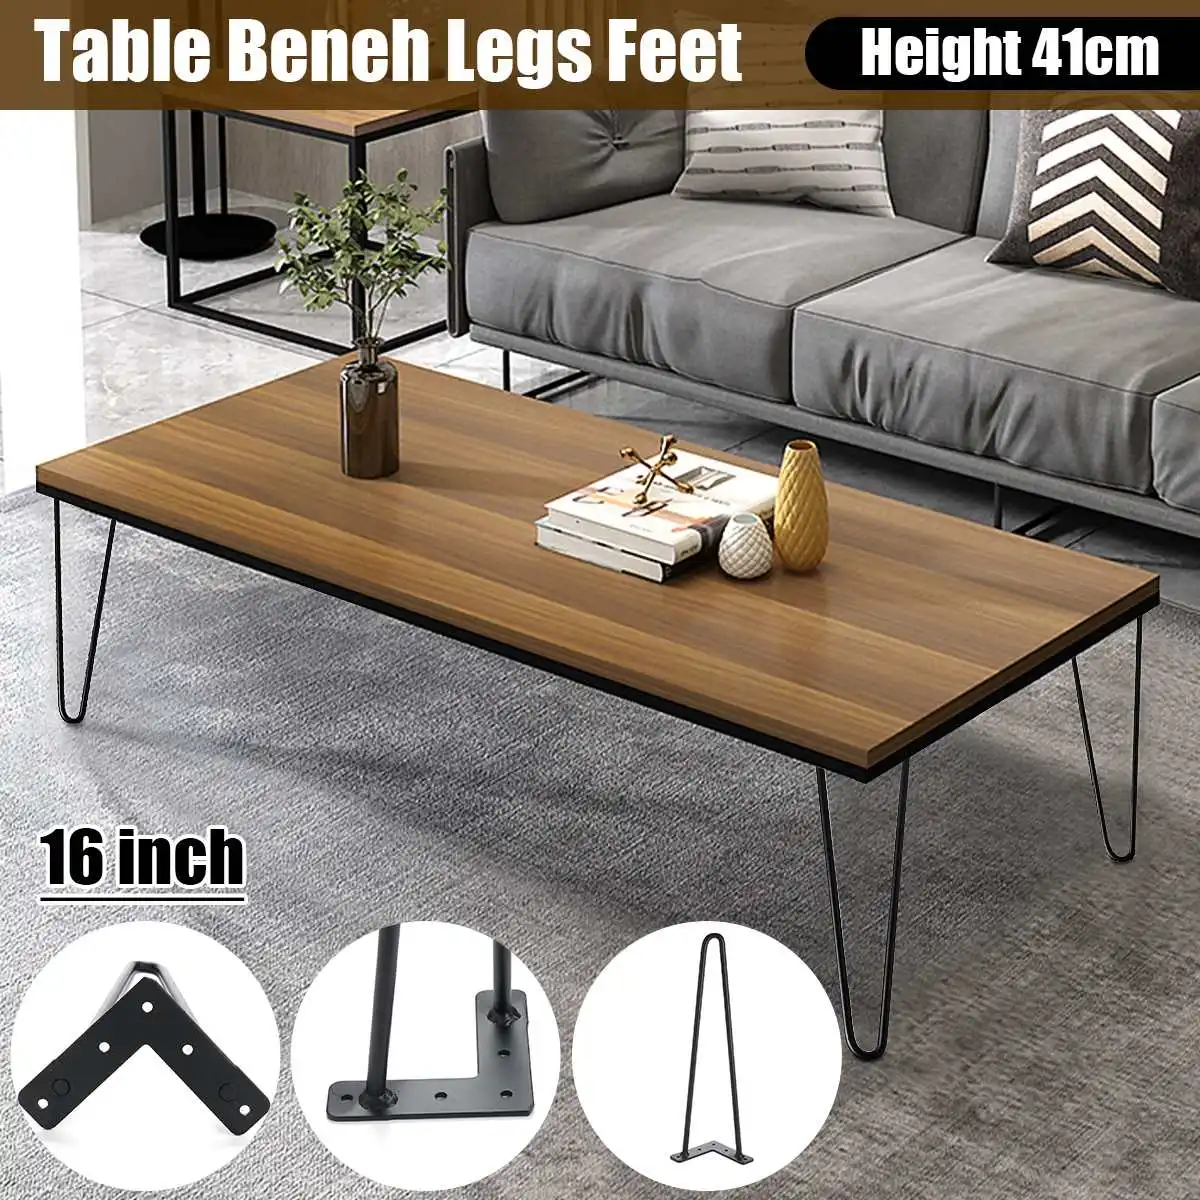 4x Metal Furniture Legs Cabinet Bed Table Desk Lounge Sofa Leg Chair Stand Feet 